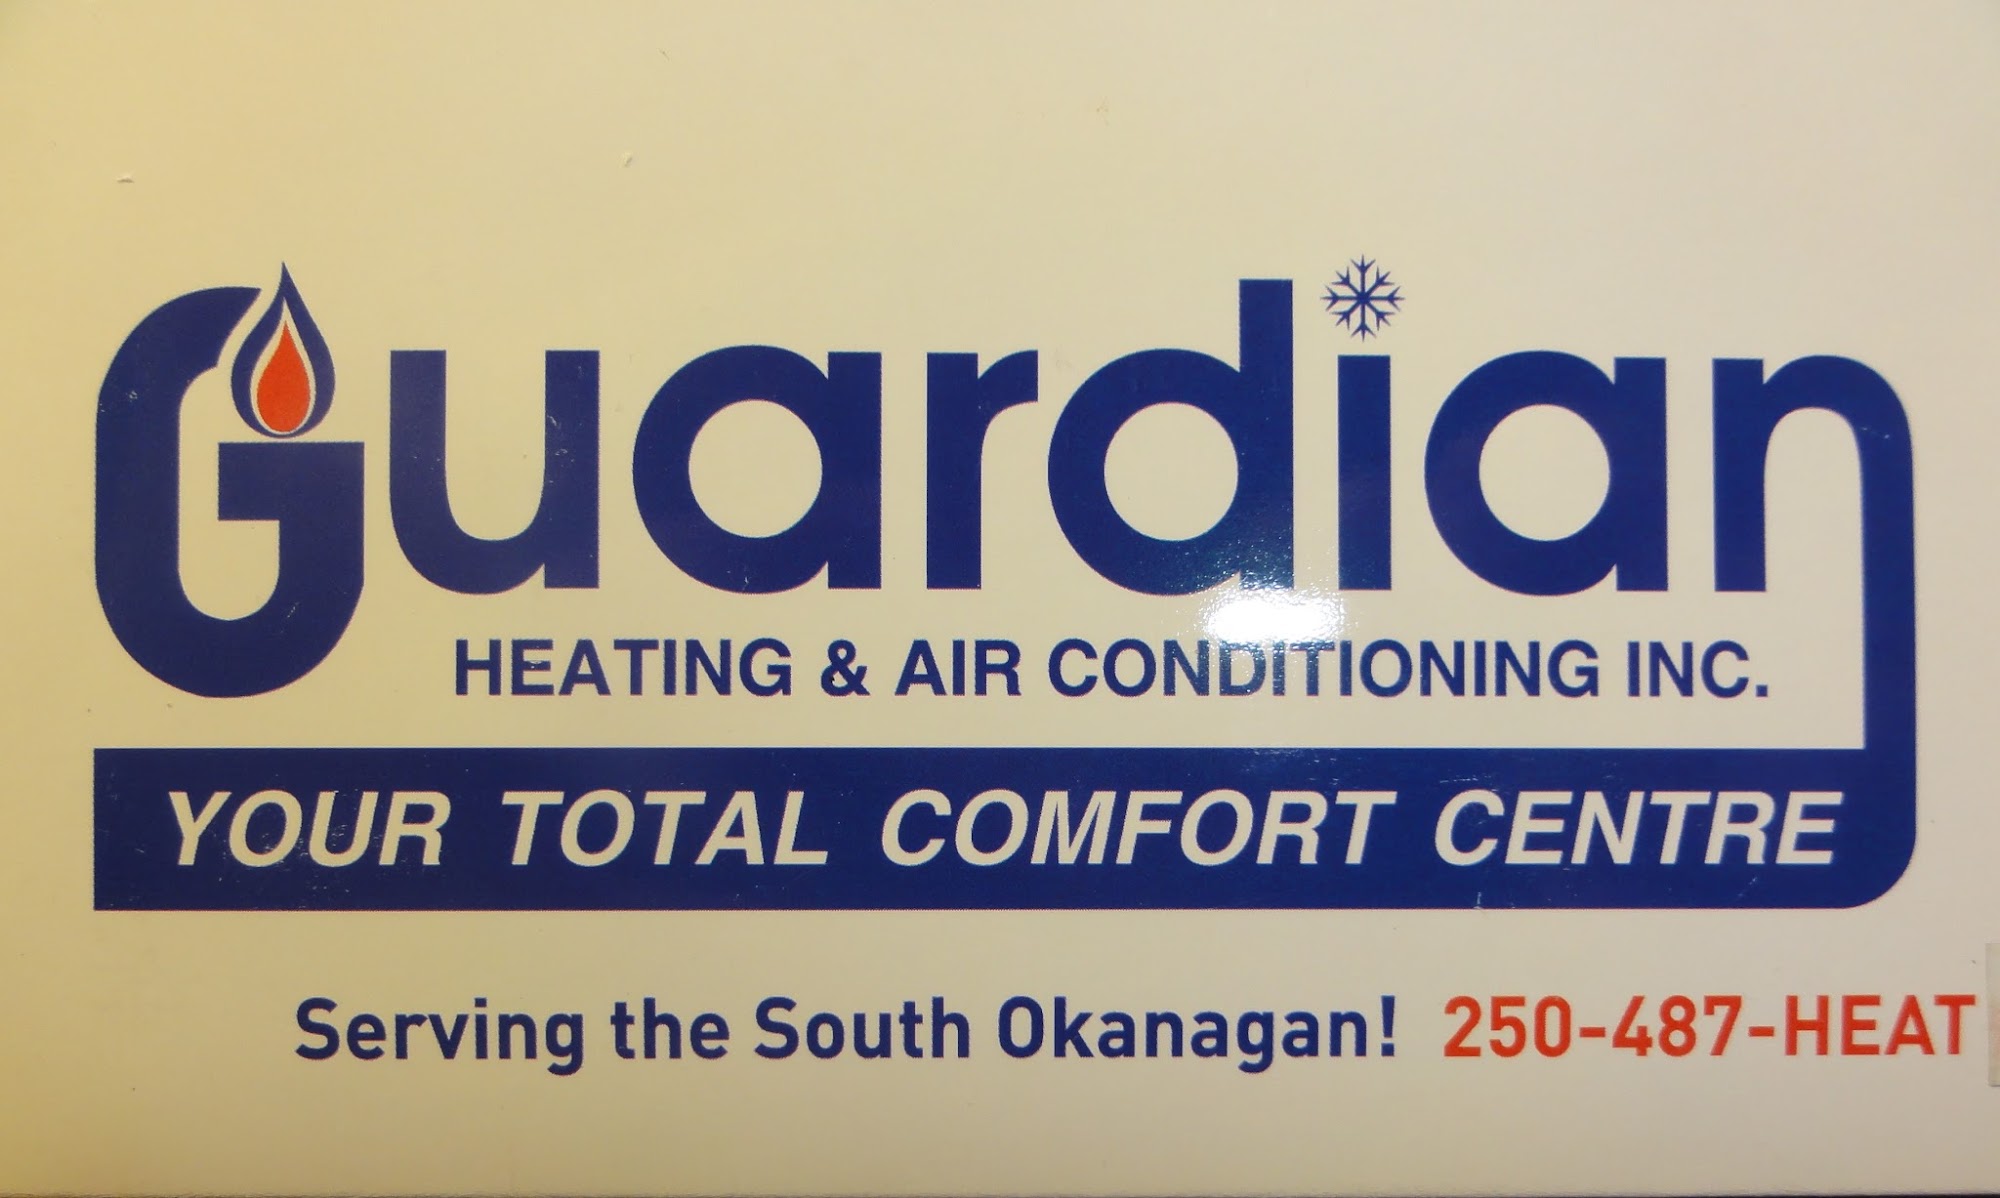 Guardian Heating & Air Conditioning